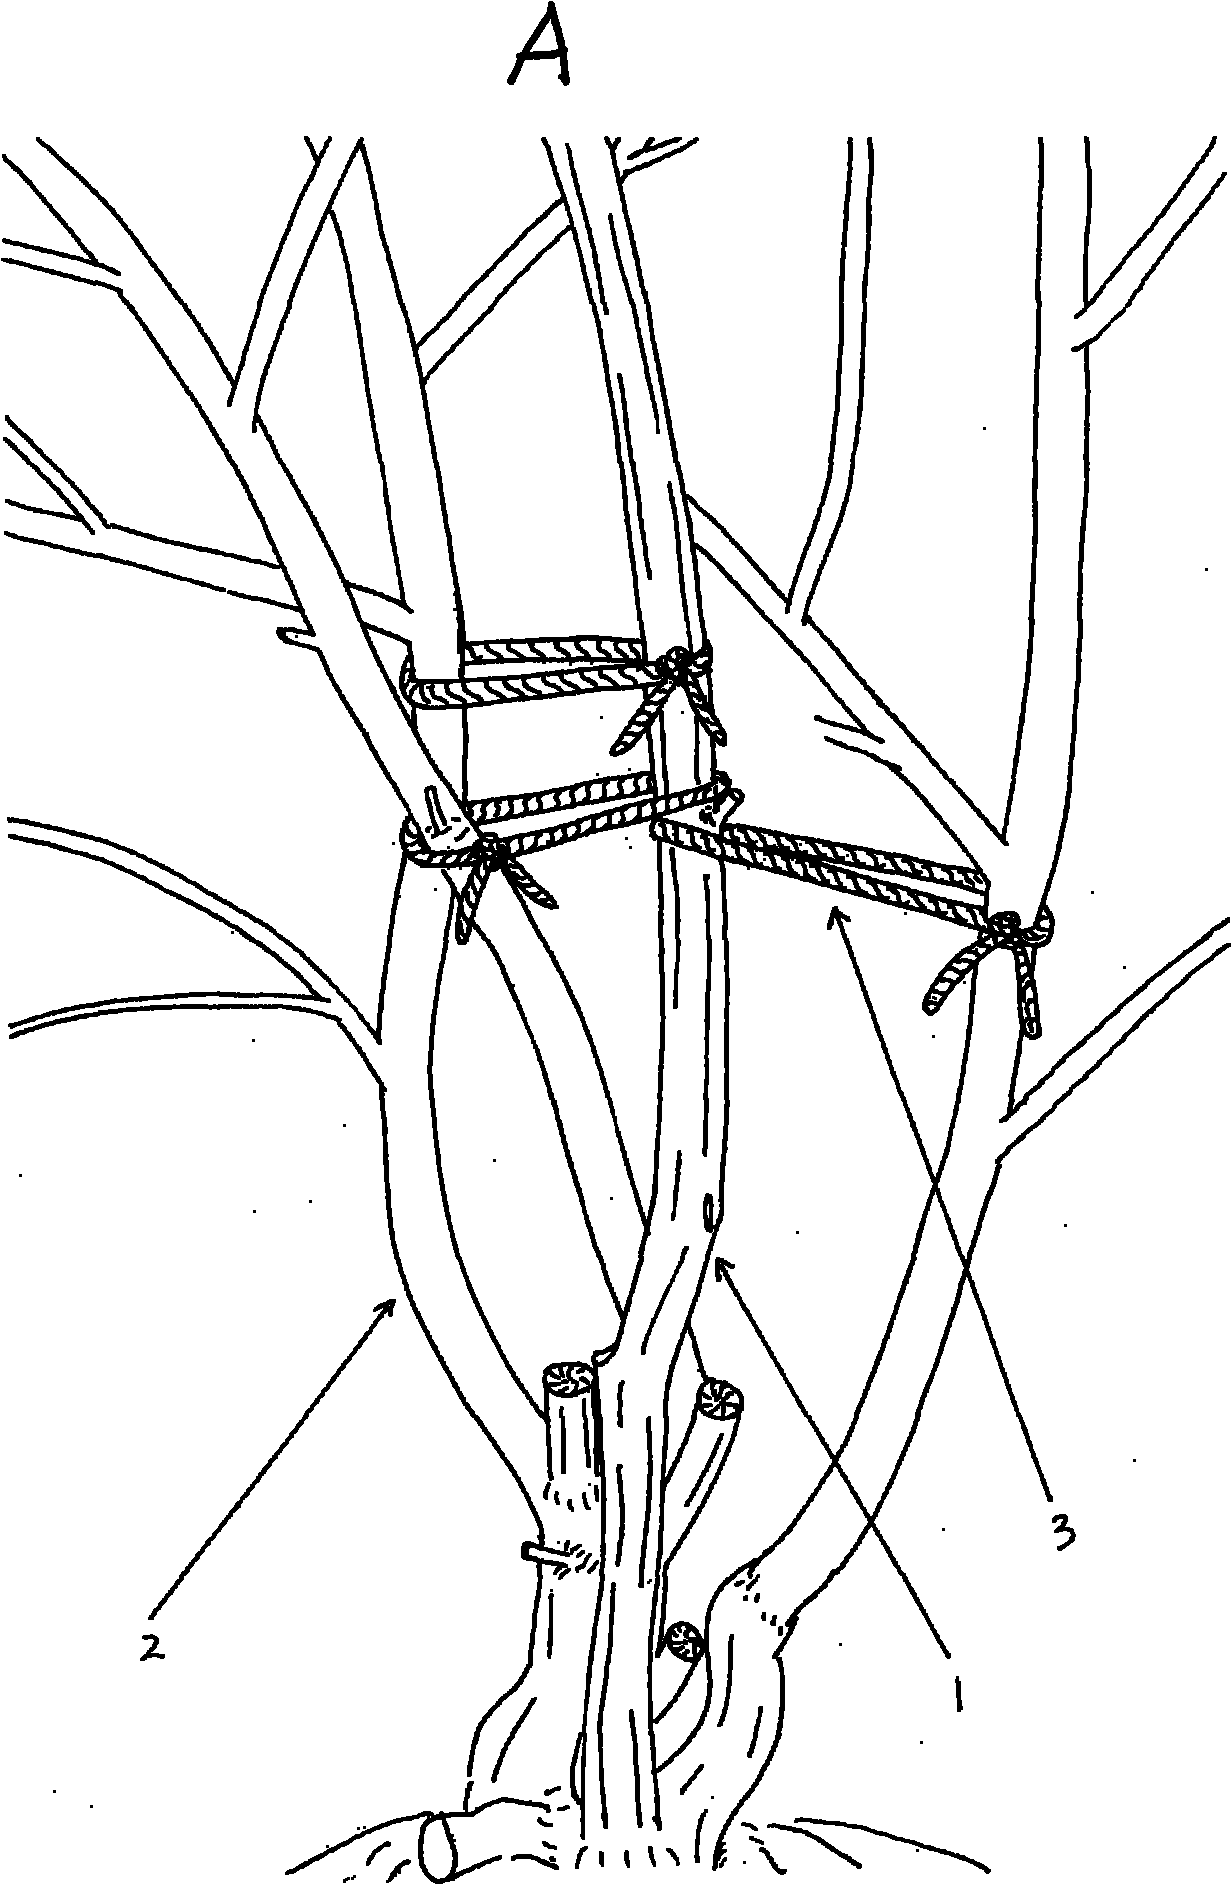 Method for retaining trunk and molding green date tree